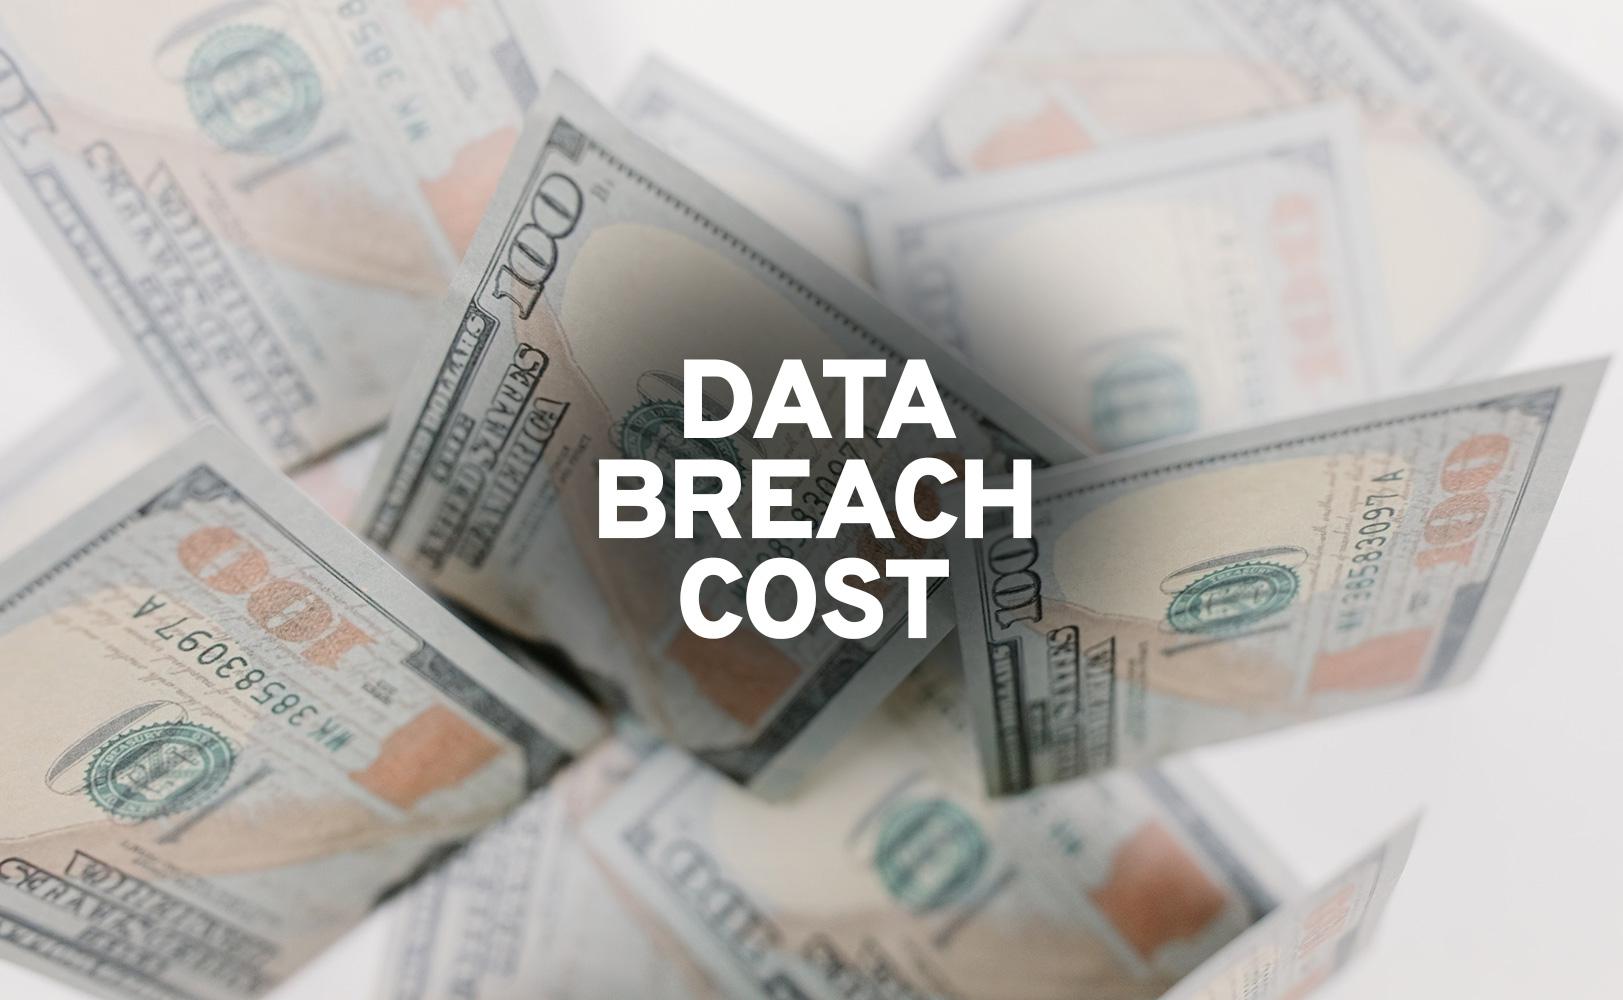 The global average cost of a data breach reaches an alltime high of 4